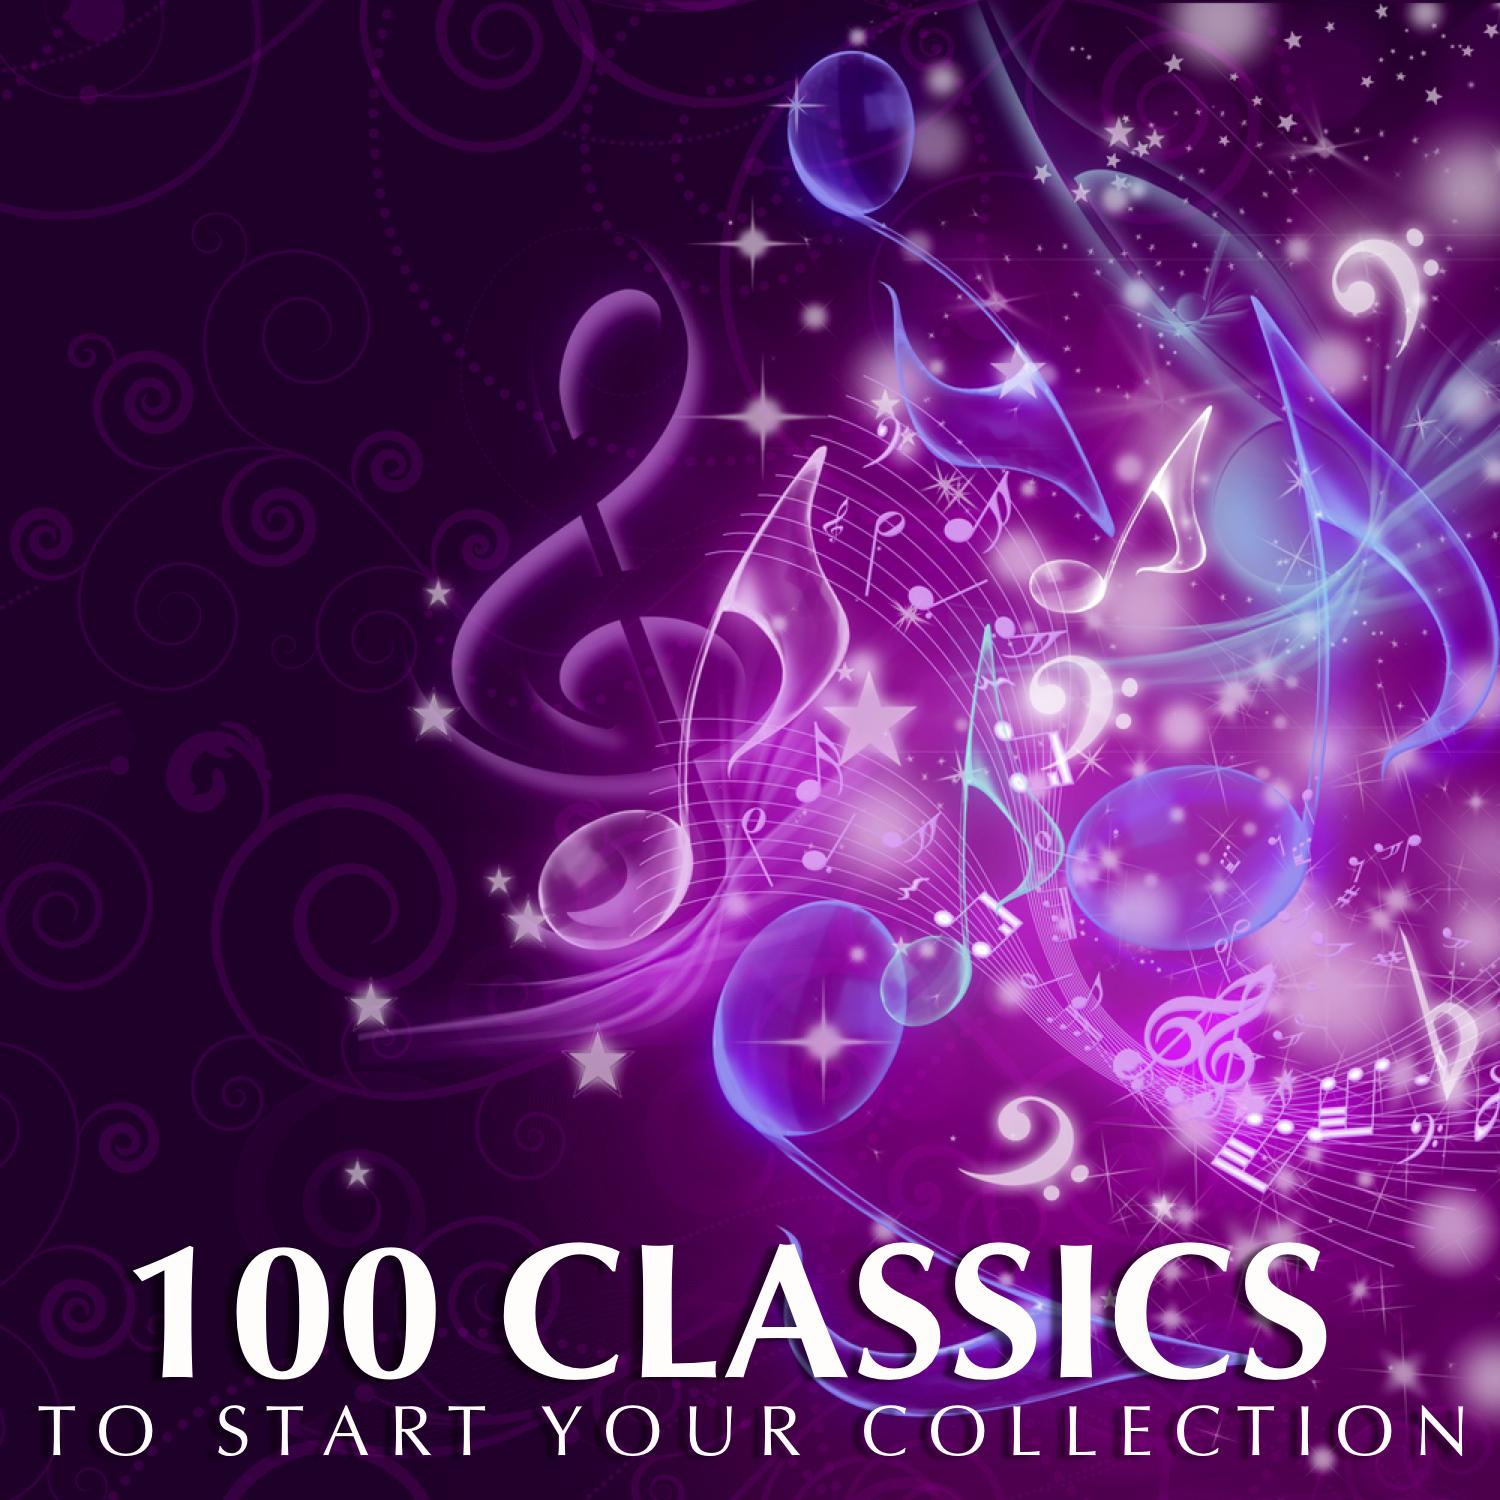 100 Classics To Start Your Collection